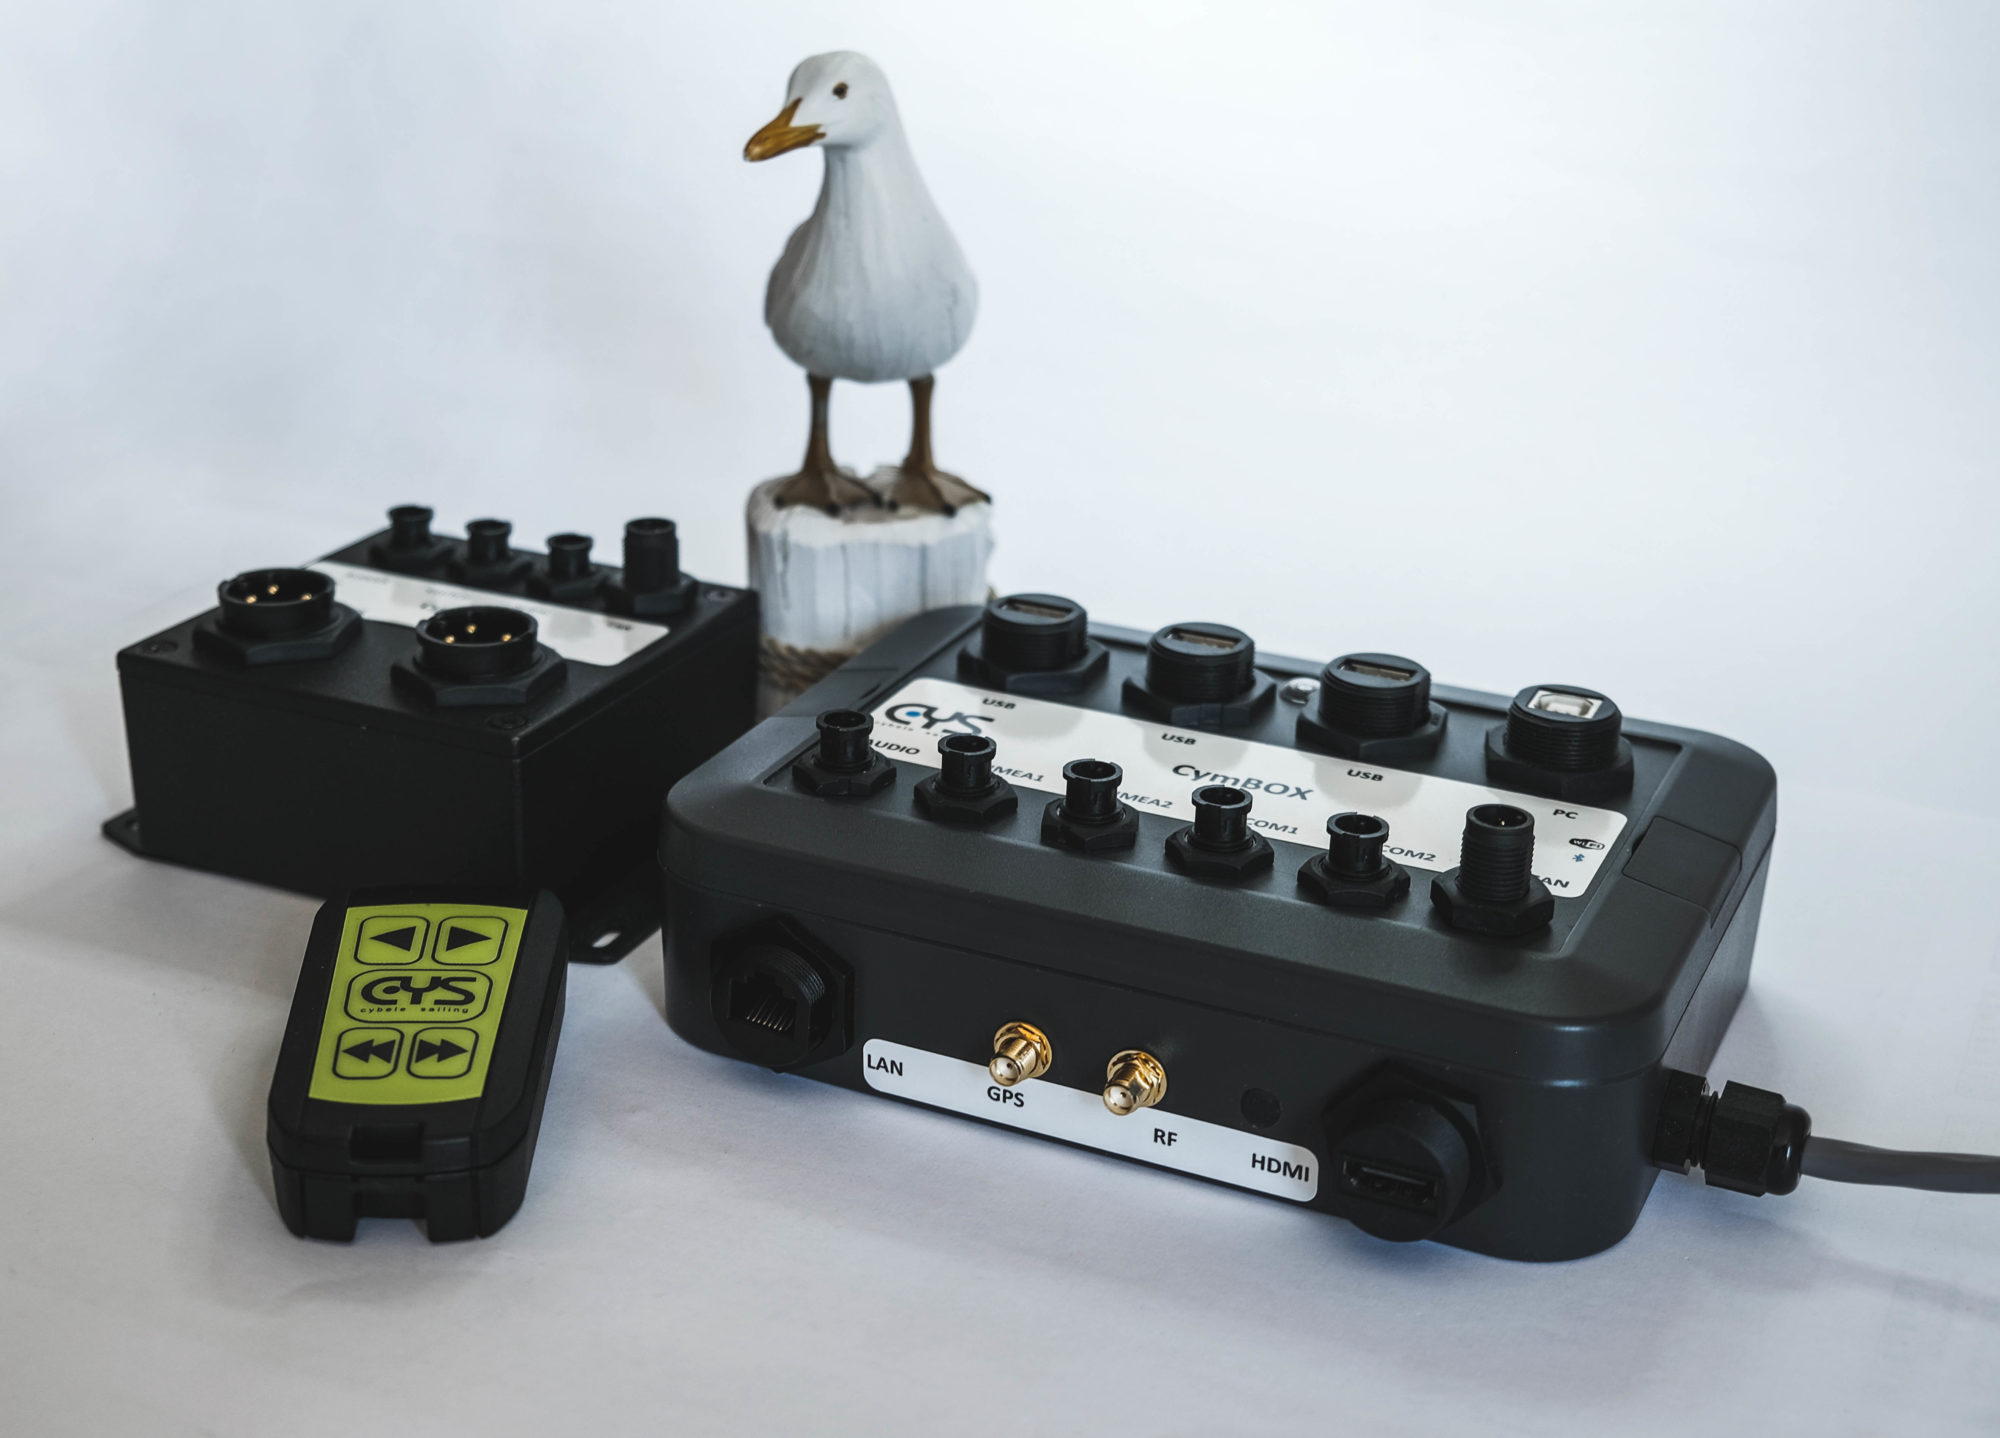 sailingboat autopilot  - CysBOX system - modules and remote control with the seagull ...